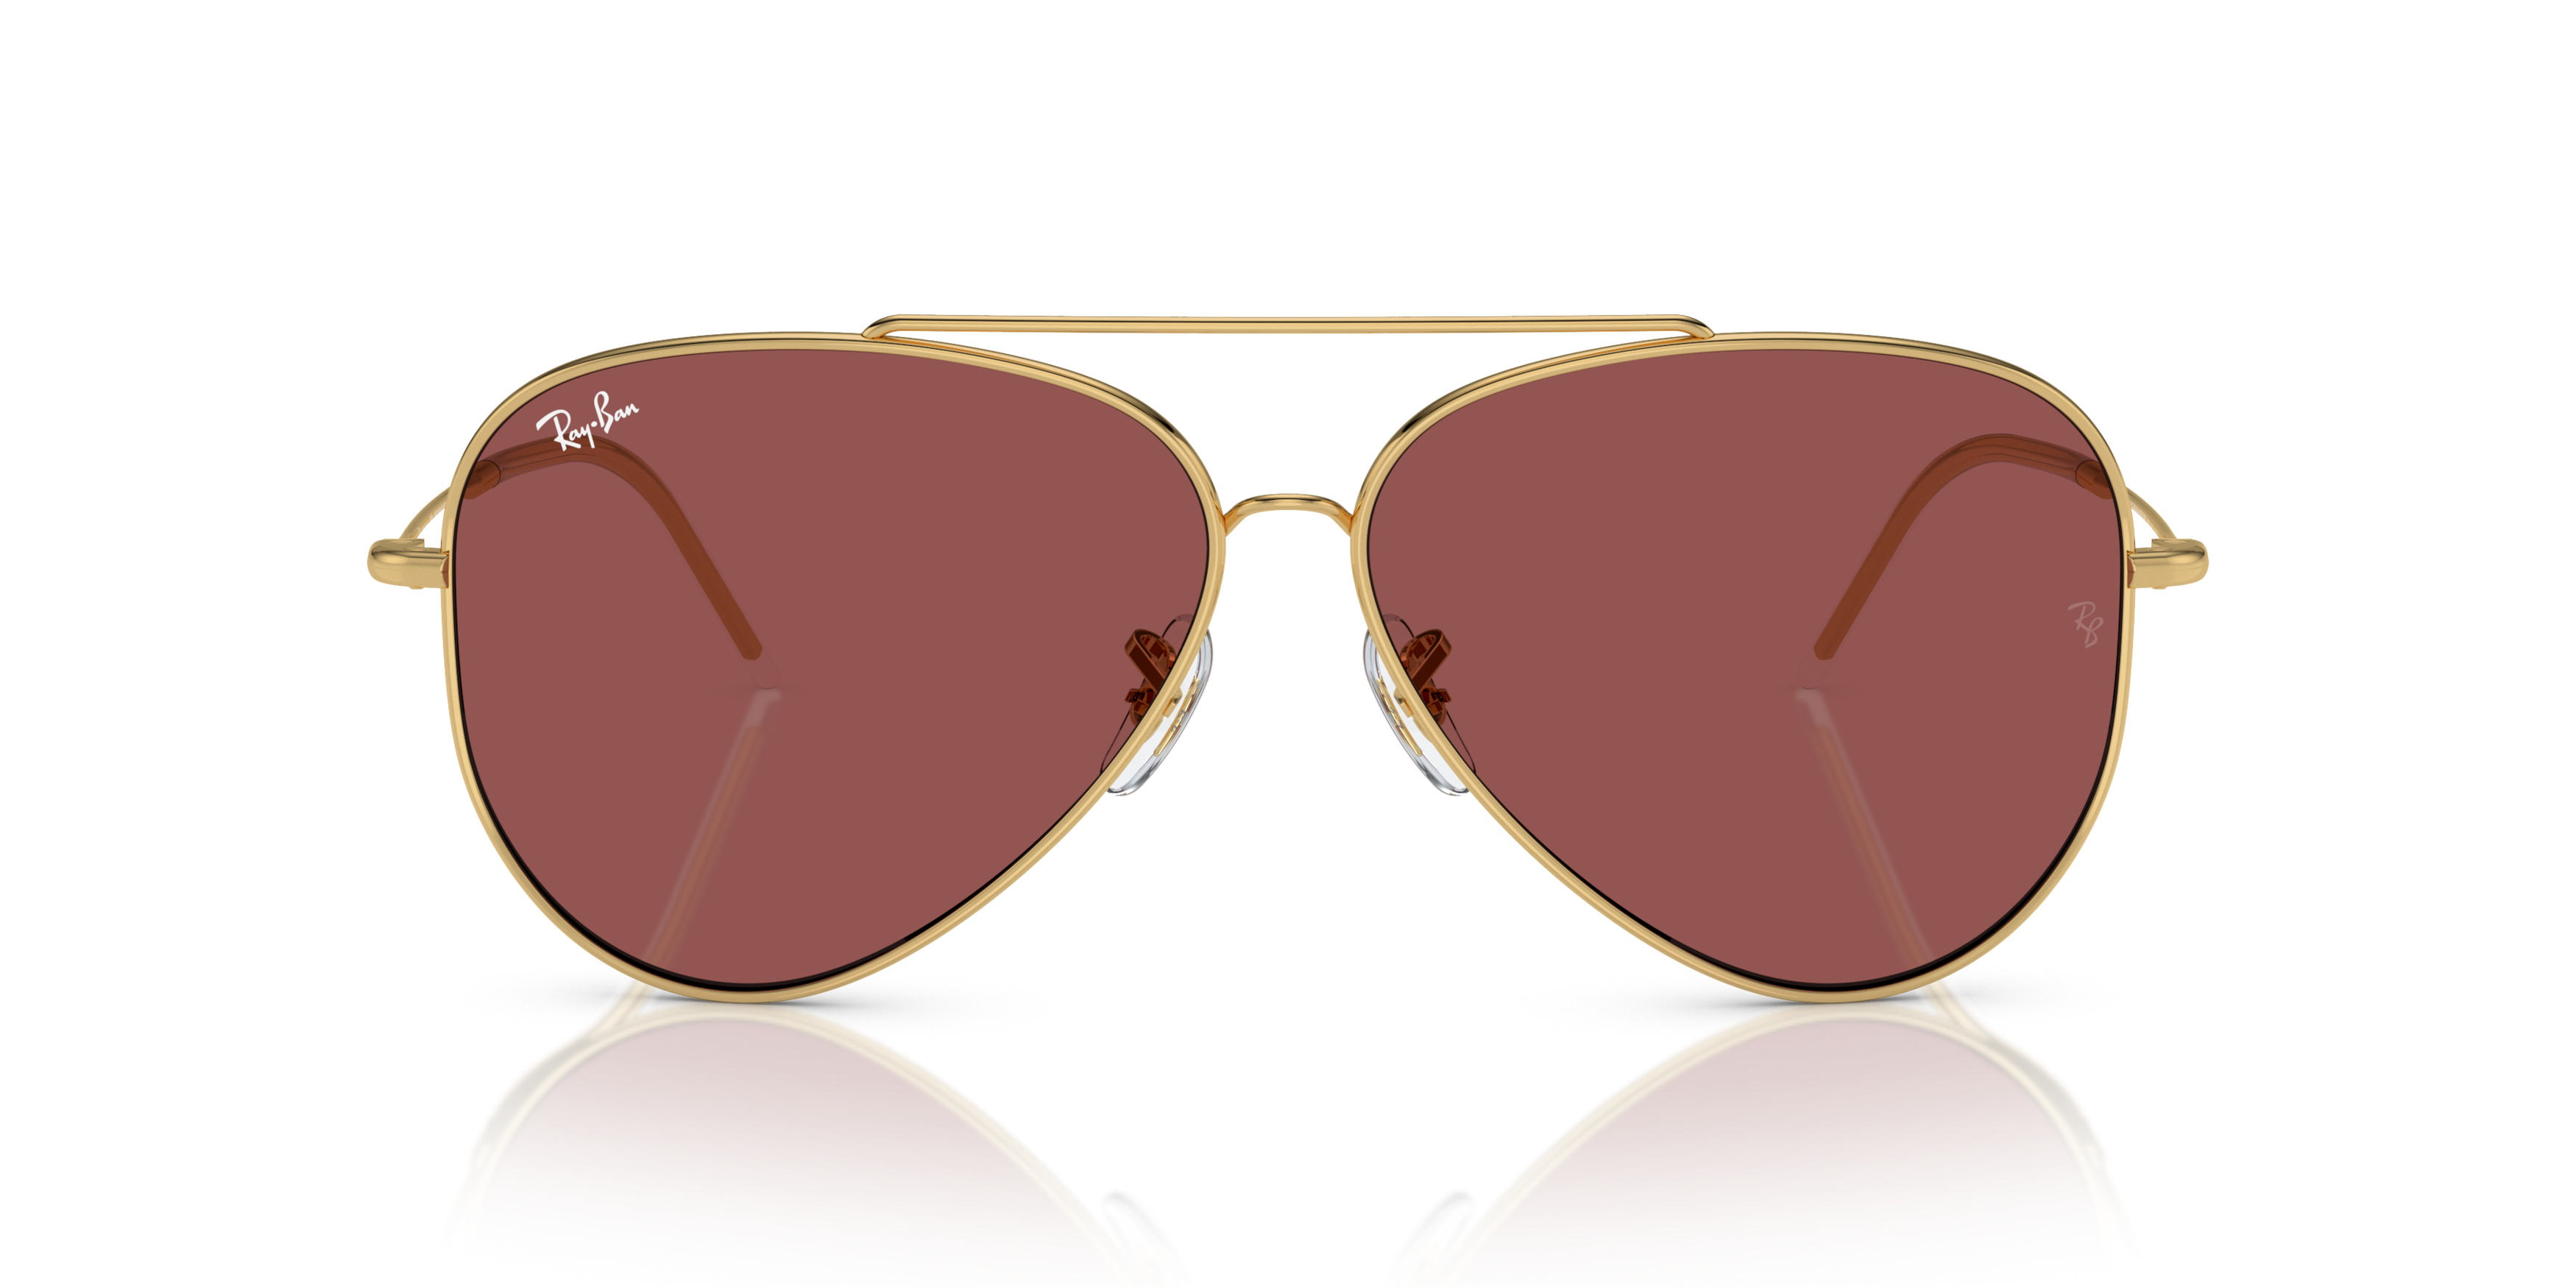 [products.image.front] Ray-Ban Aviator Reverse RBR 0101S Sunglasses